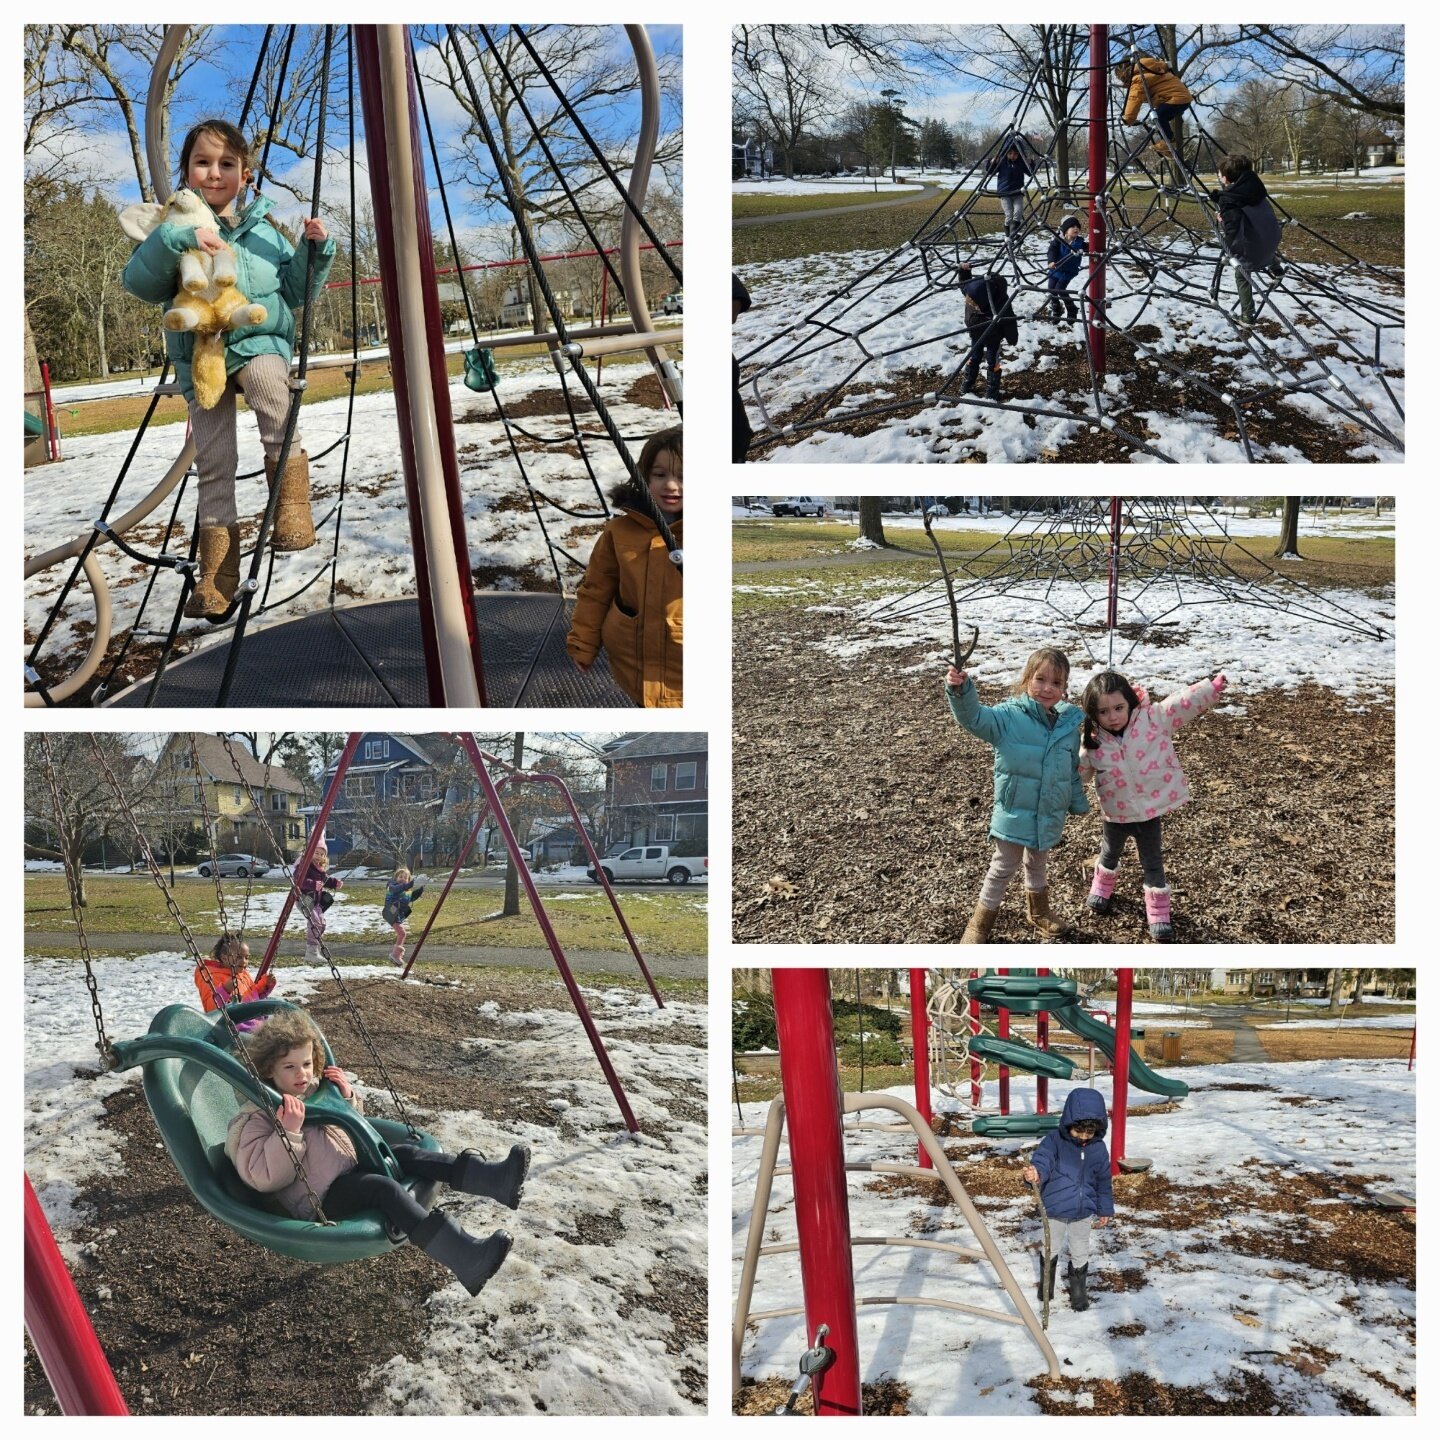 Pre-K had a lovely park morning! The children enjoyed an hour of outdoor play filled with running, swinging, climbing, and jumping!

#southorangenj #southorangevillagenj #maplewoodnj #maplewoodvillagenj #prekactivities #prekindergarten #ProgressiveEd